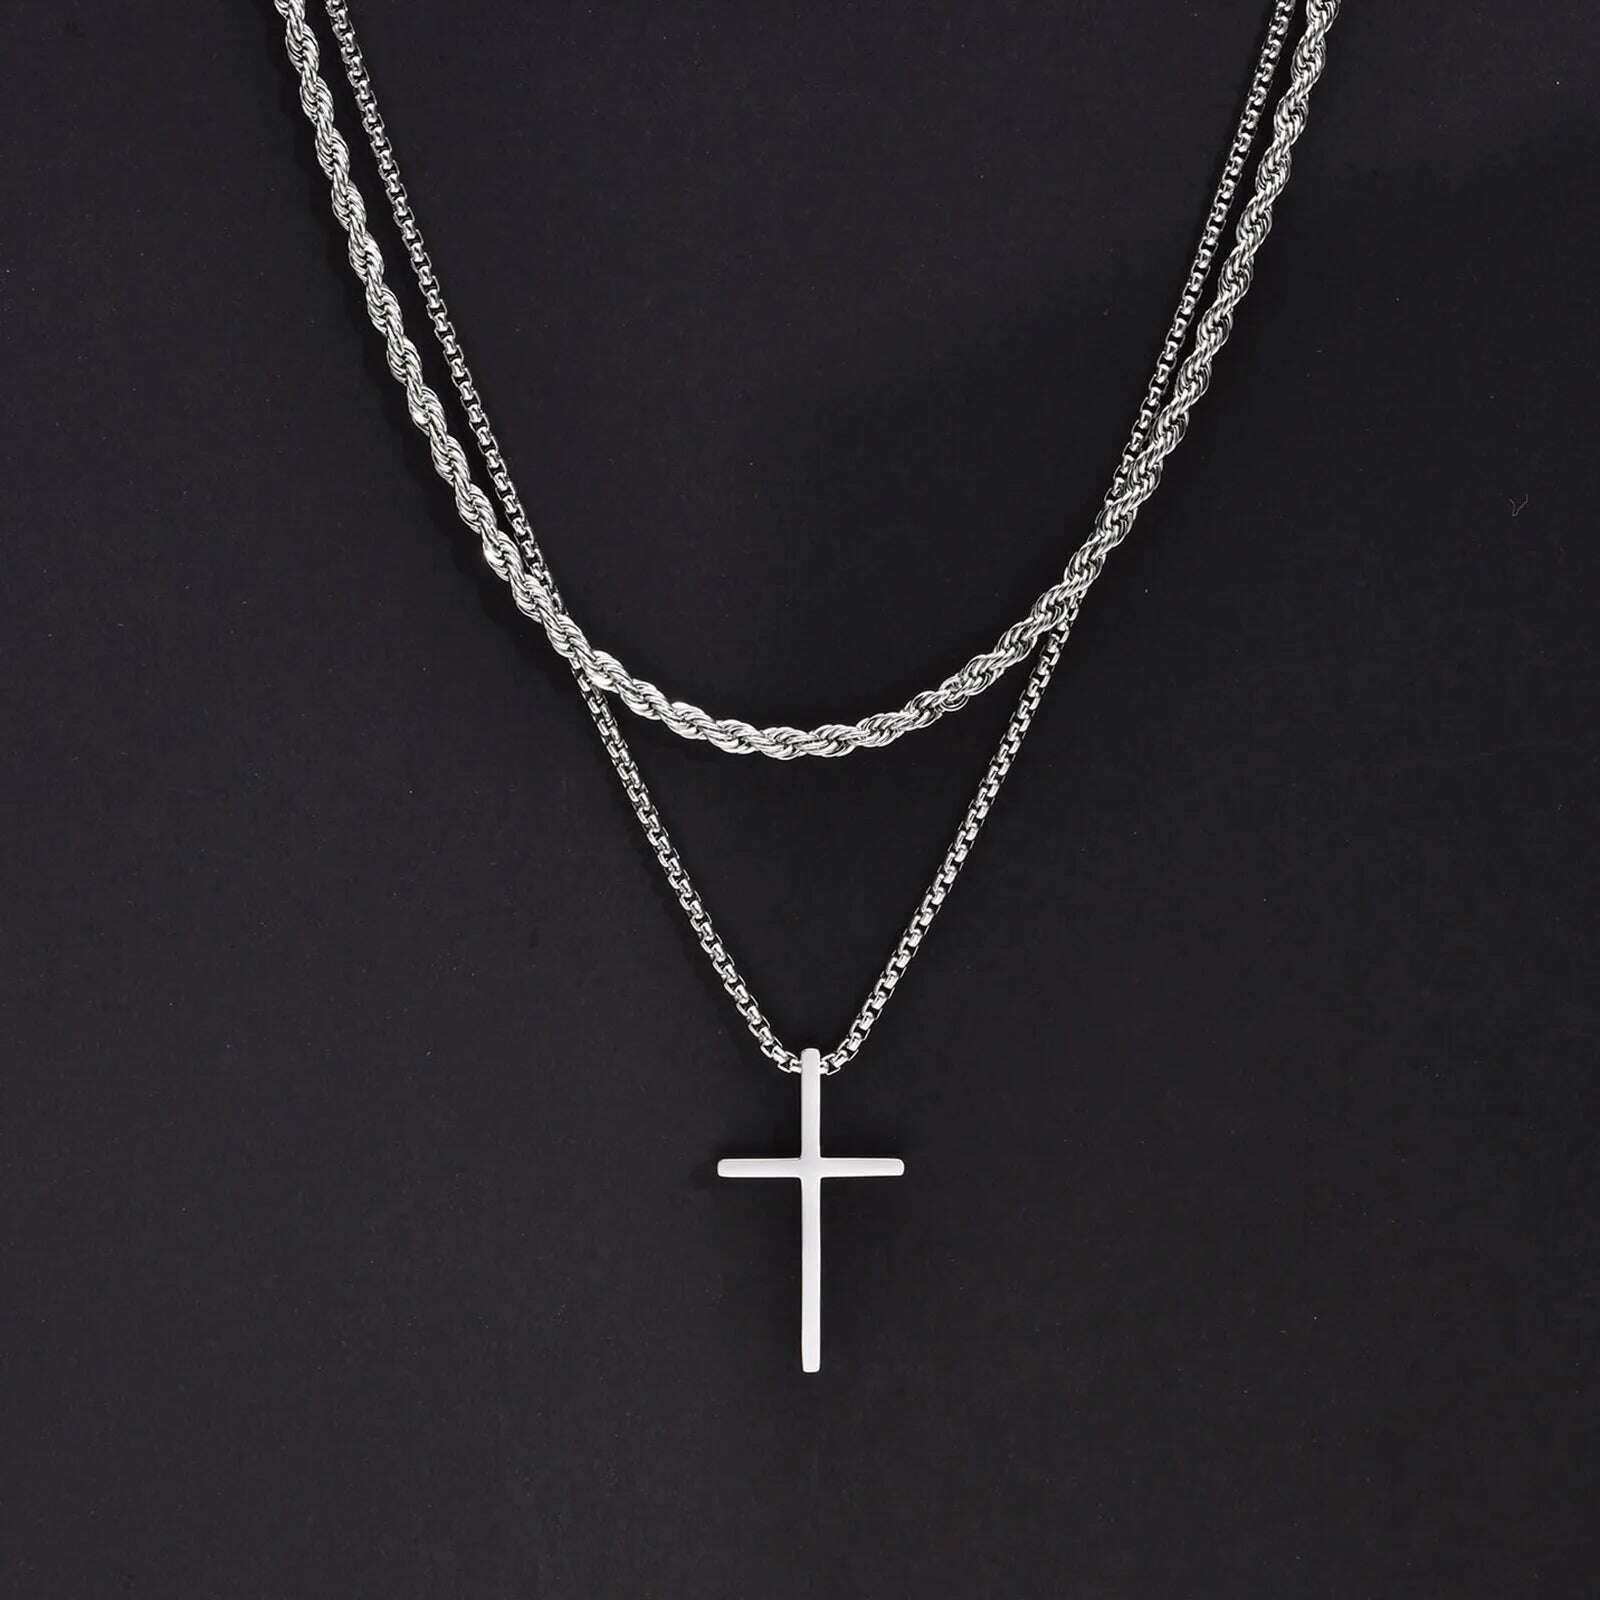 KIMLUD, Vnox Mens Cross Necklaces, Stainless Steel Layered Plain Cross Pendant, Rope Box Chain Necklace, Simple Prayer Jesus Collar, NC-1035S NC-039-55S, KIMLUD Womens Clothes